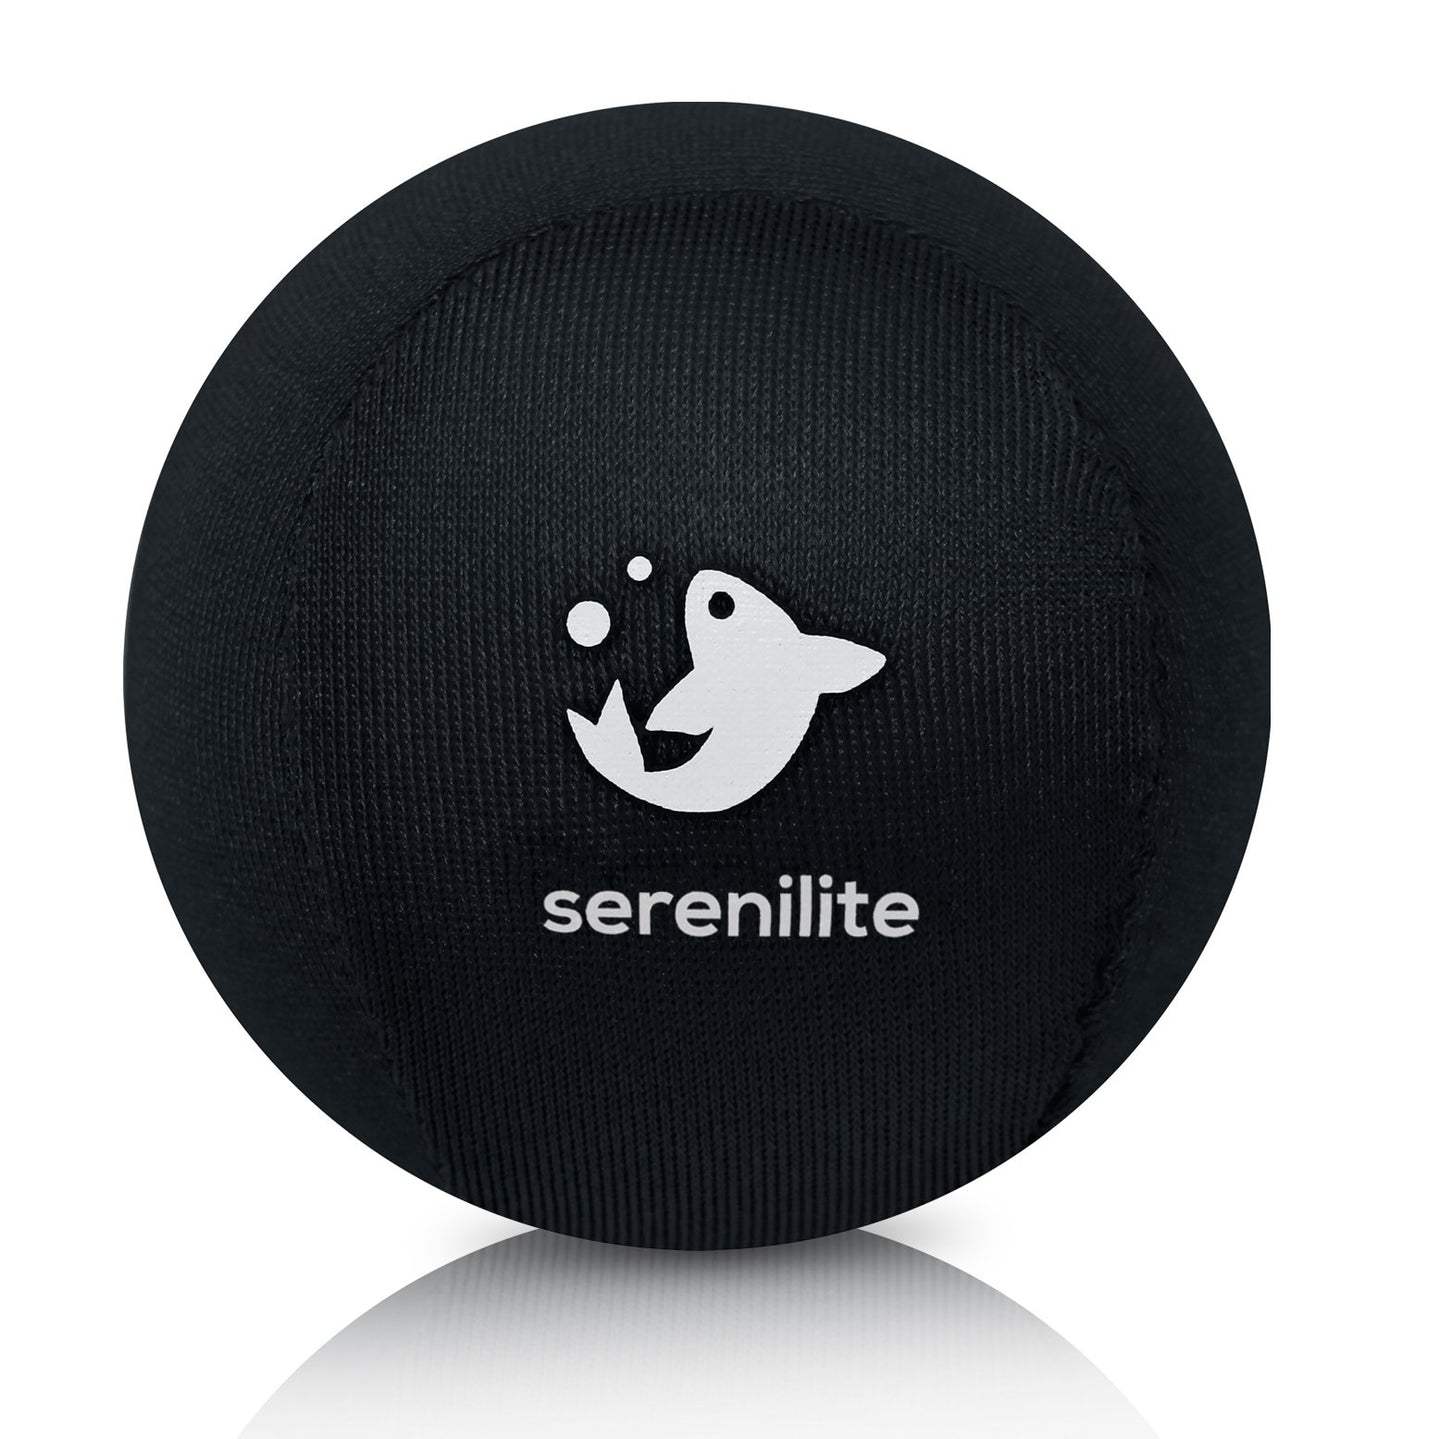 Serenilite Hand Therapy Stress Ball - Stress & Anxiety Relief - Jet Black